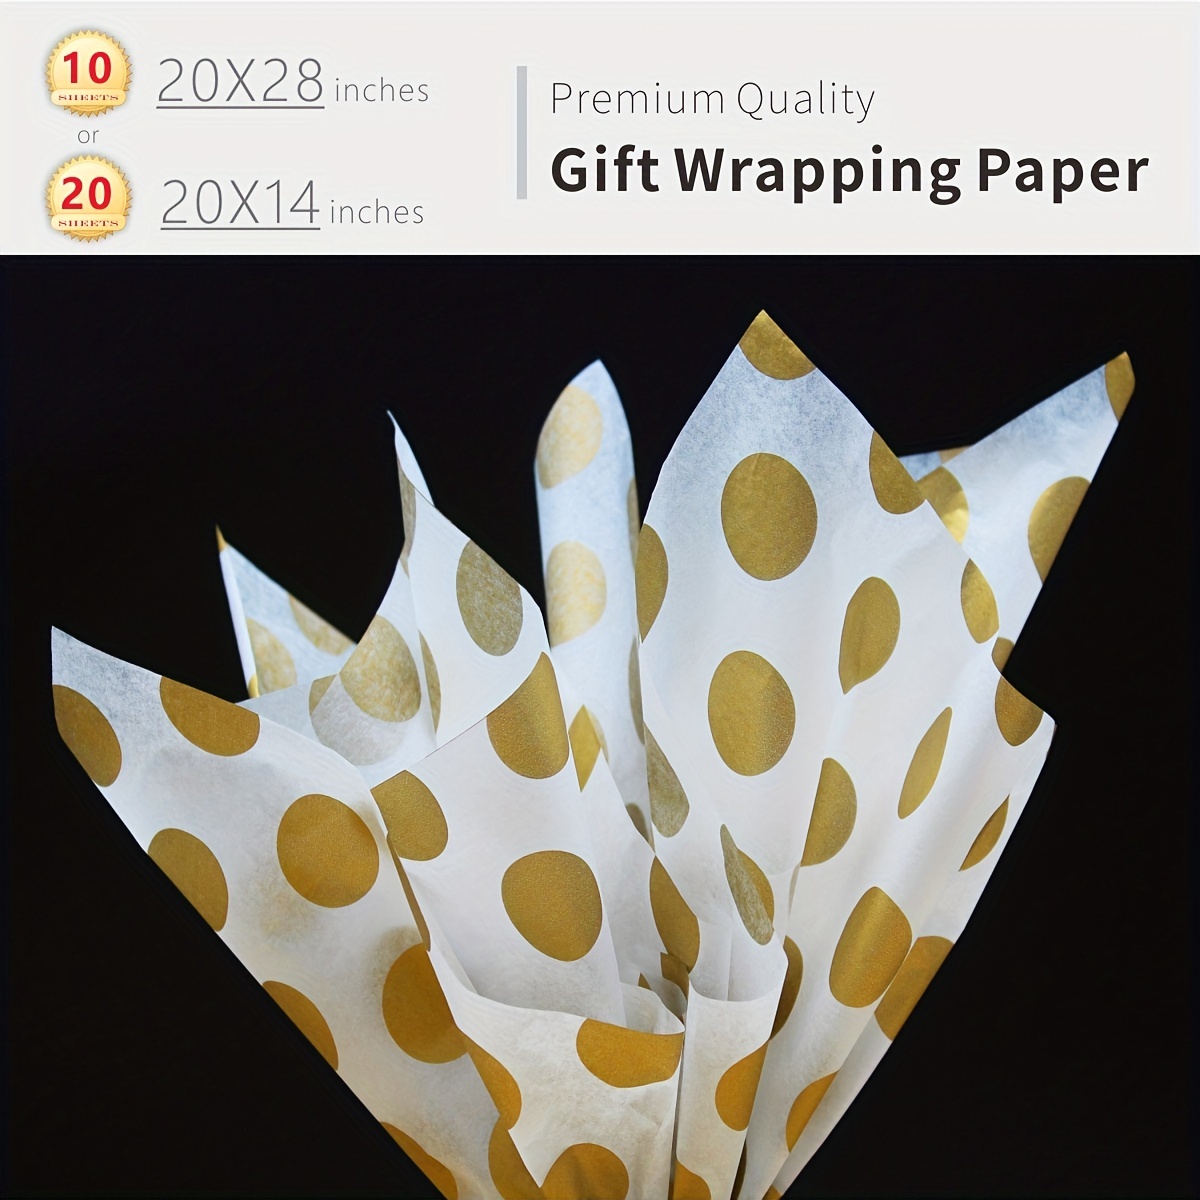 60 Sheets Metallic Gold Star Tissue Paper Bulk for Gift Wrapping